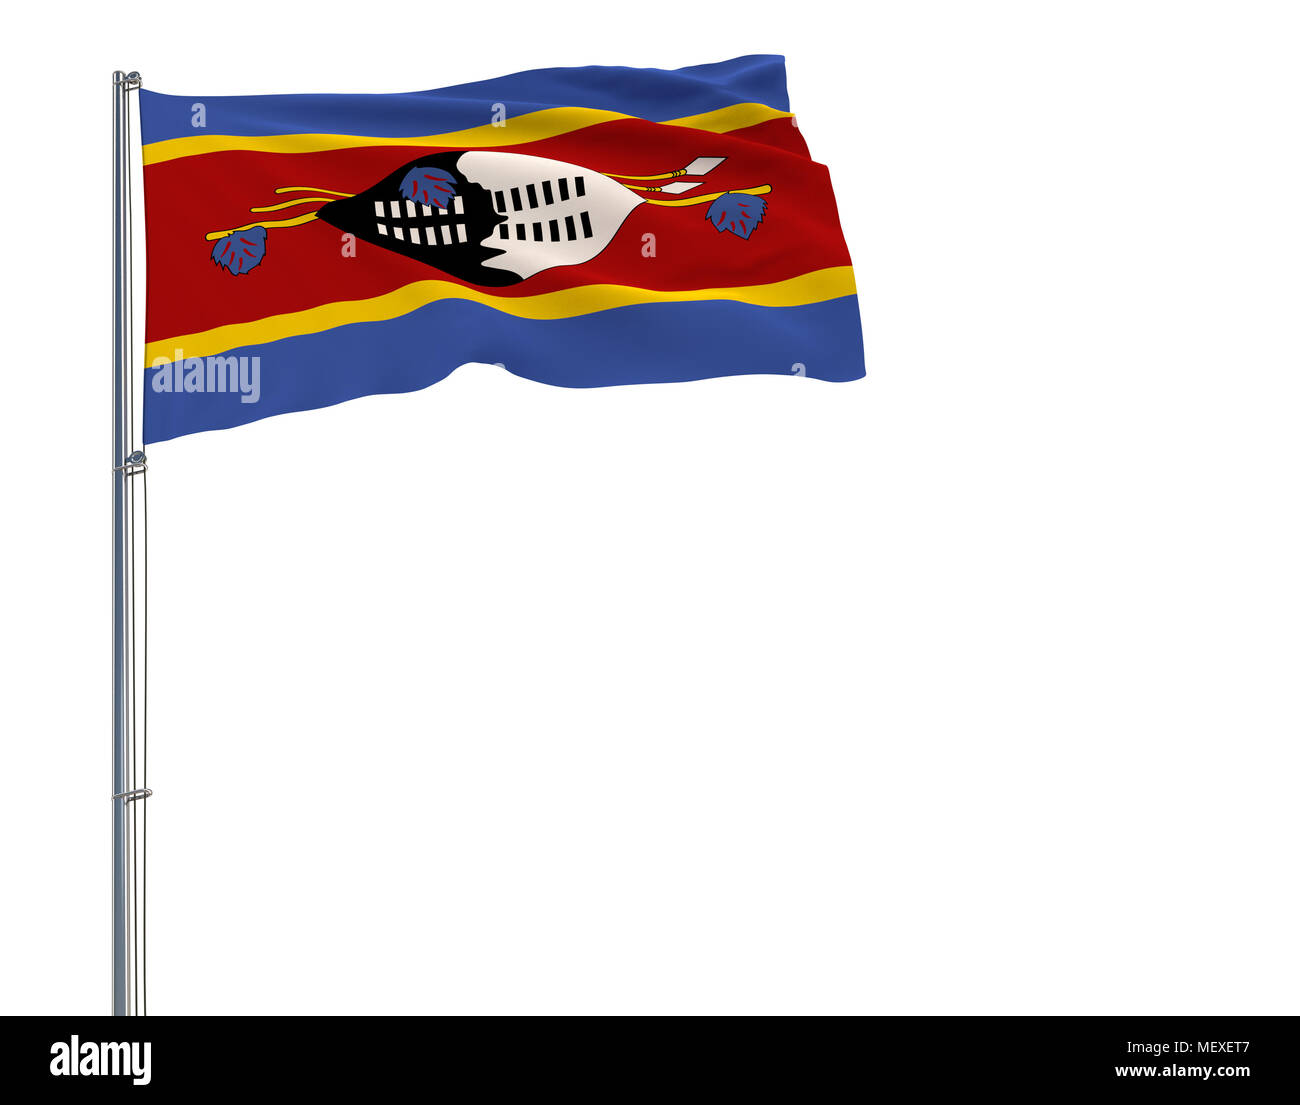 Isolate flag of Kingdom of eSwatini - Swaziland on a flagpole fluttering in the wind on a white background, 3d rendering Stock Photo